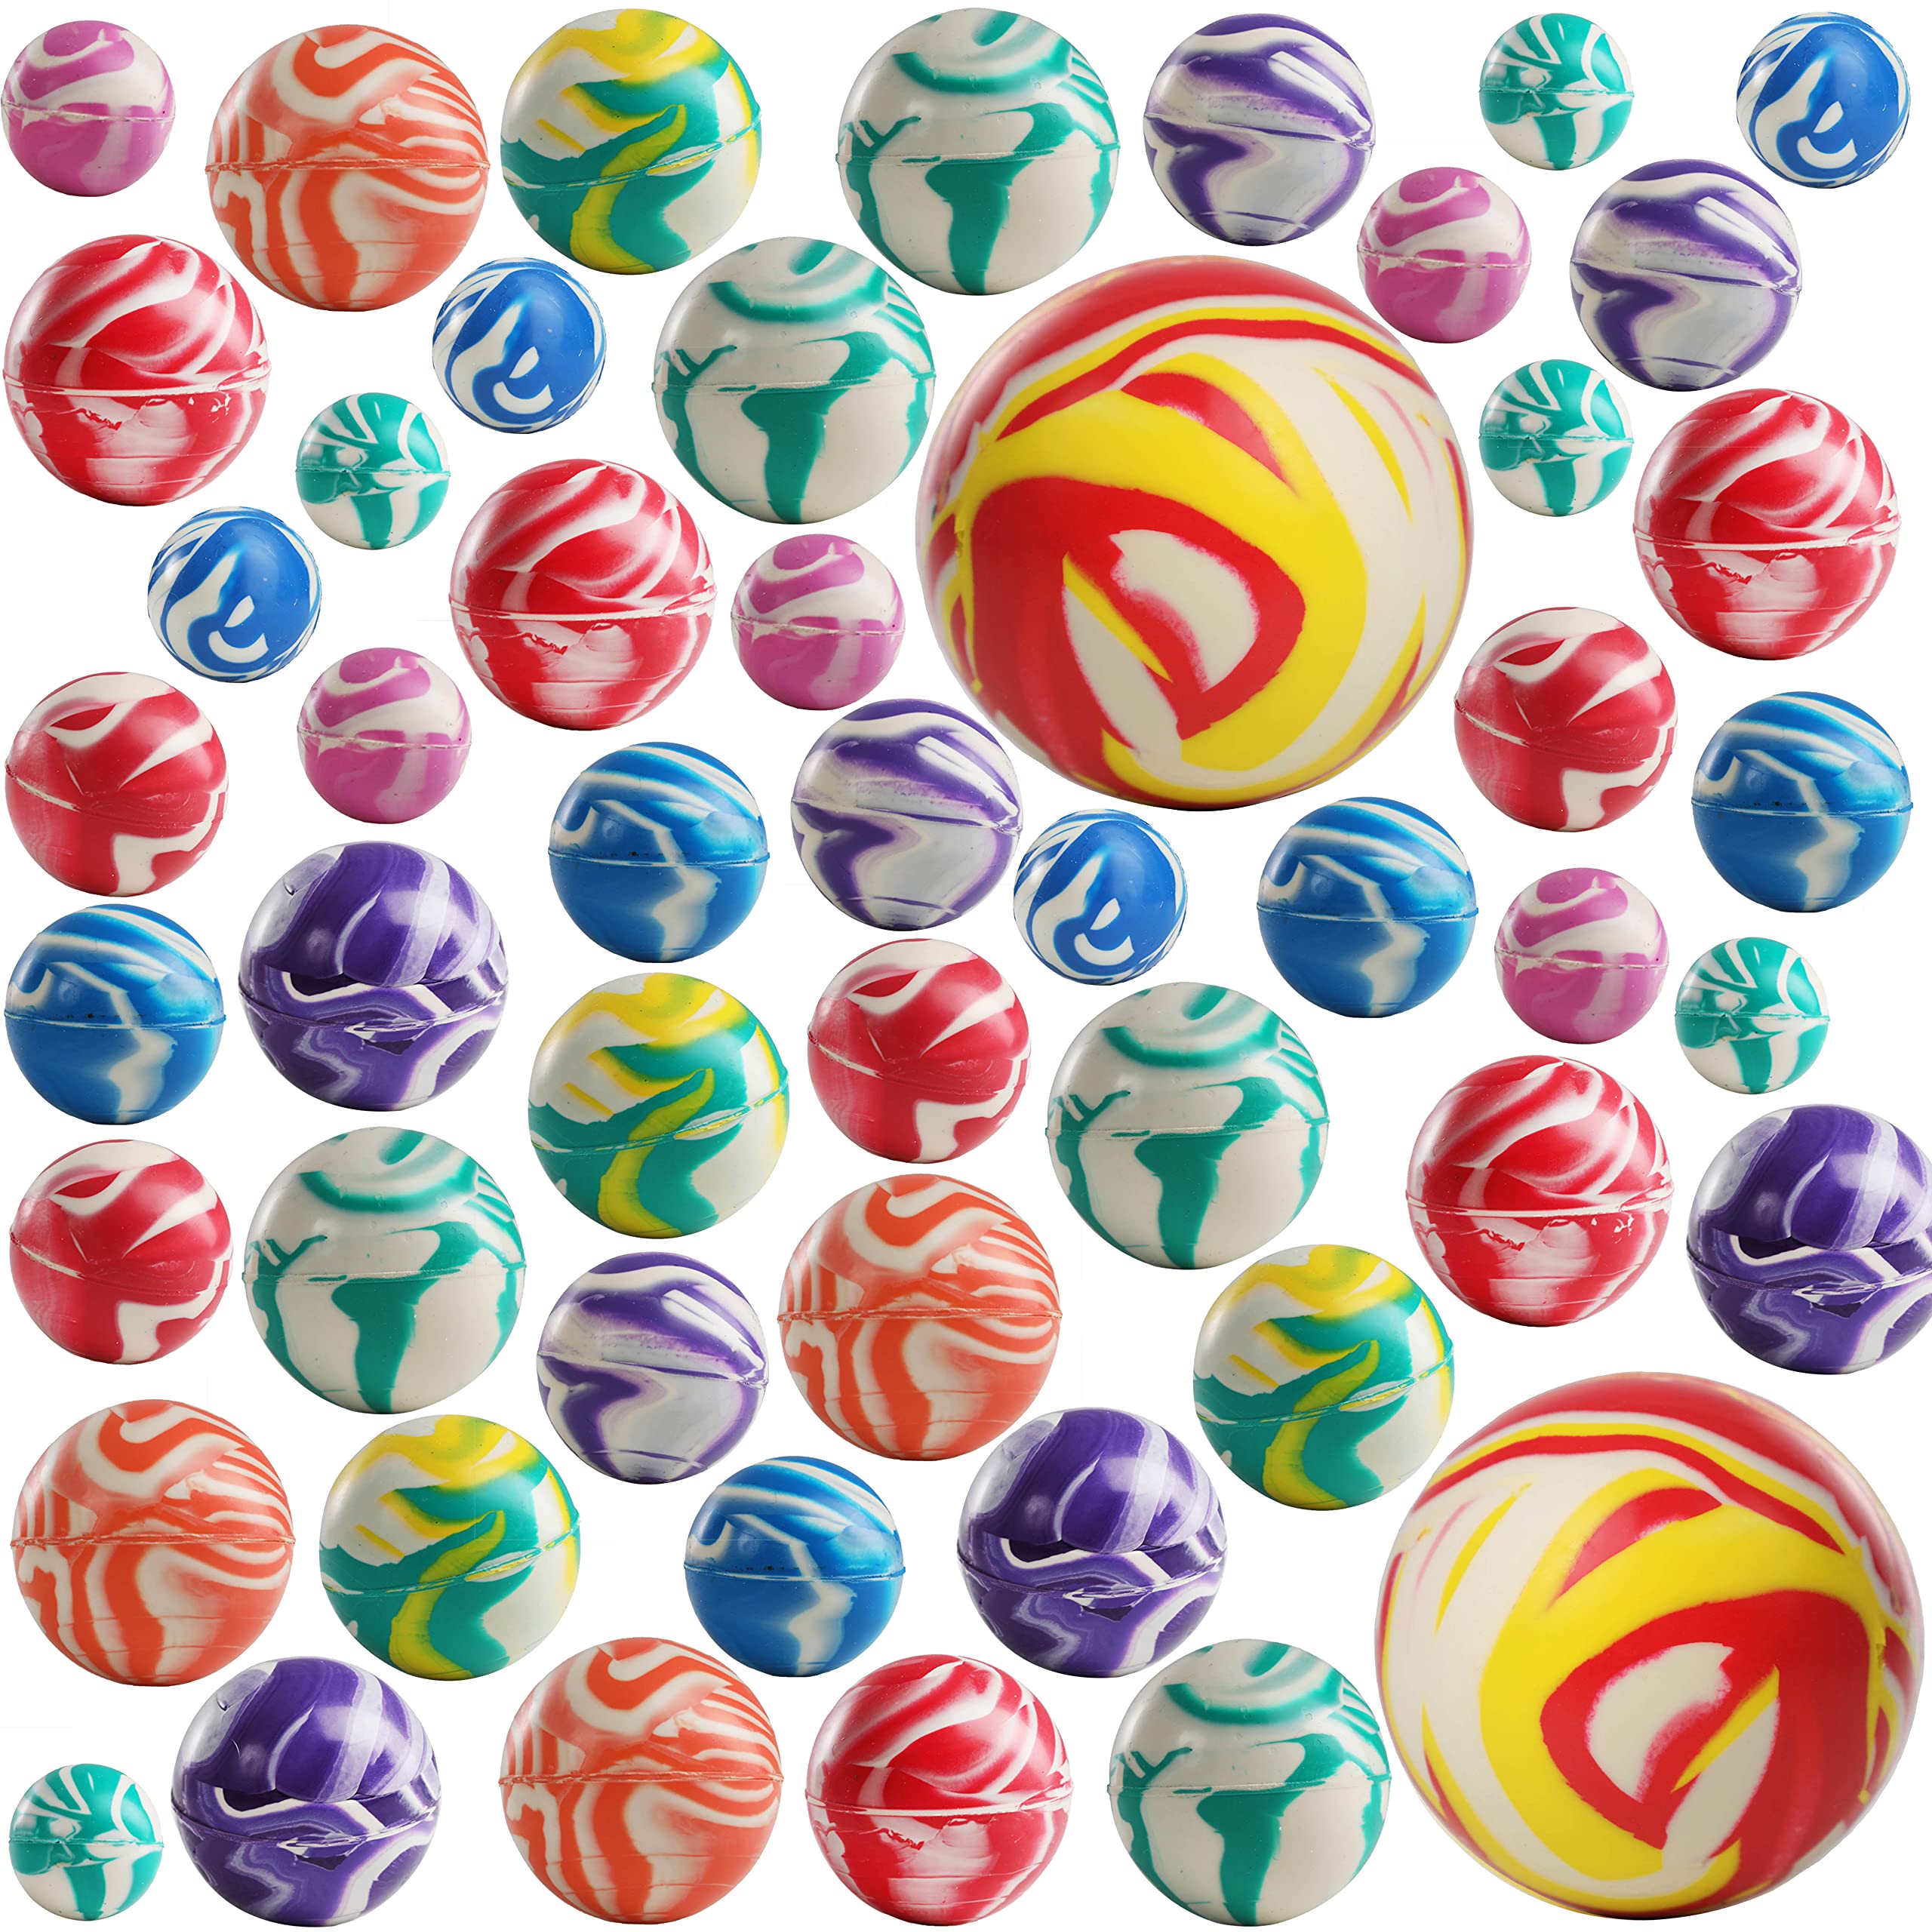 Top Right Toys Bounce Balls Party Favors - 50 Assorted Sizes Super Bouncy Balls Bulk Set, Party Favors, Vending Machines, Toys, Prizes and Gifts for Boys and Girls Ages 3 + Years Old